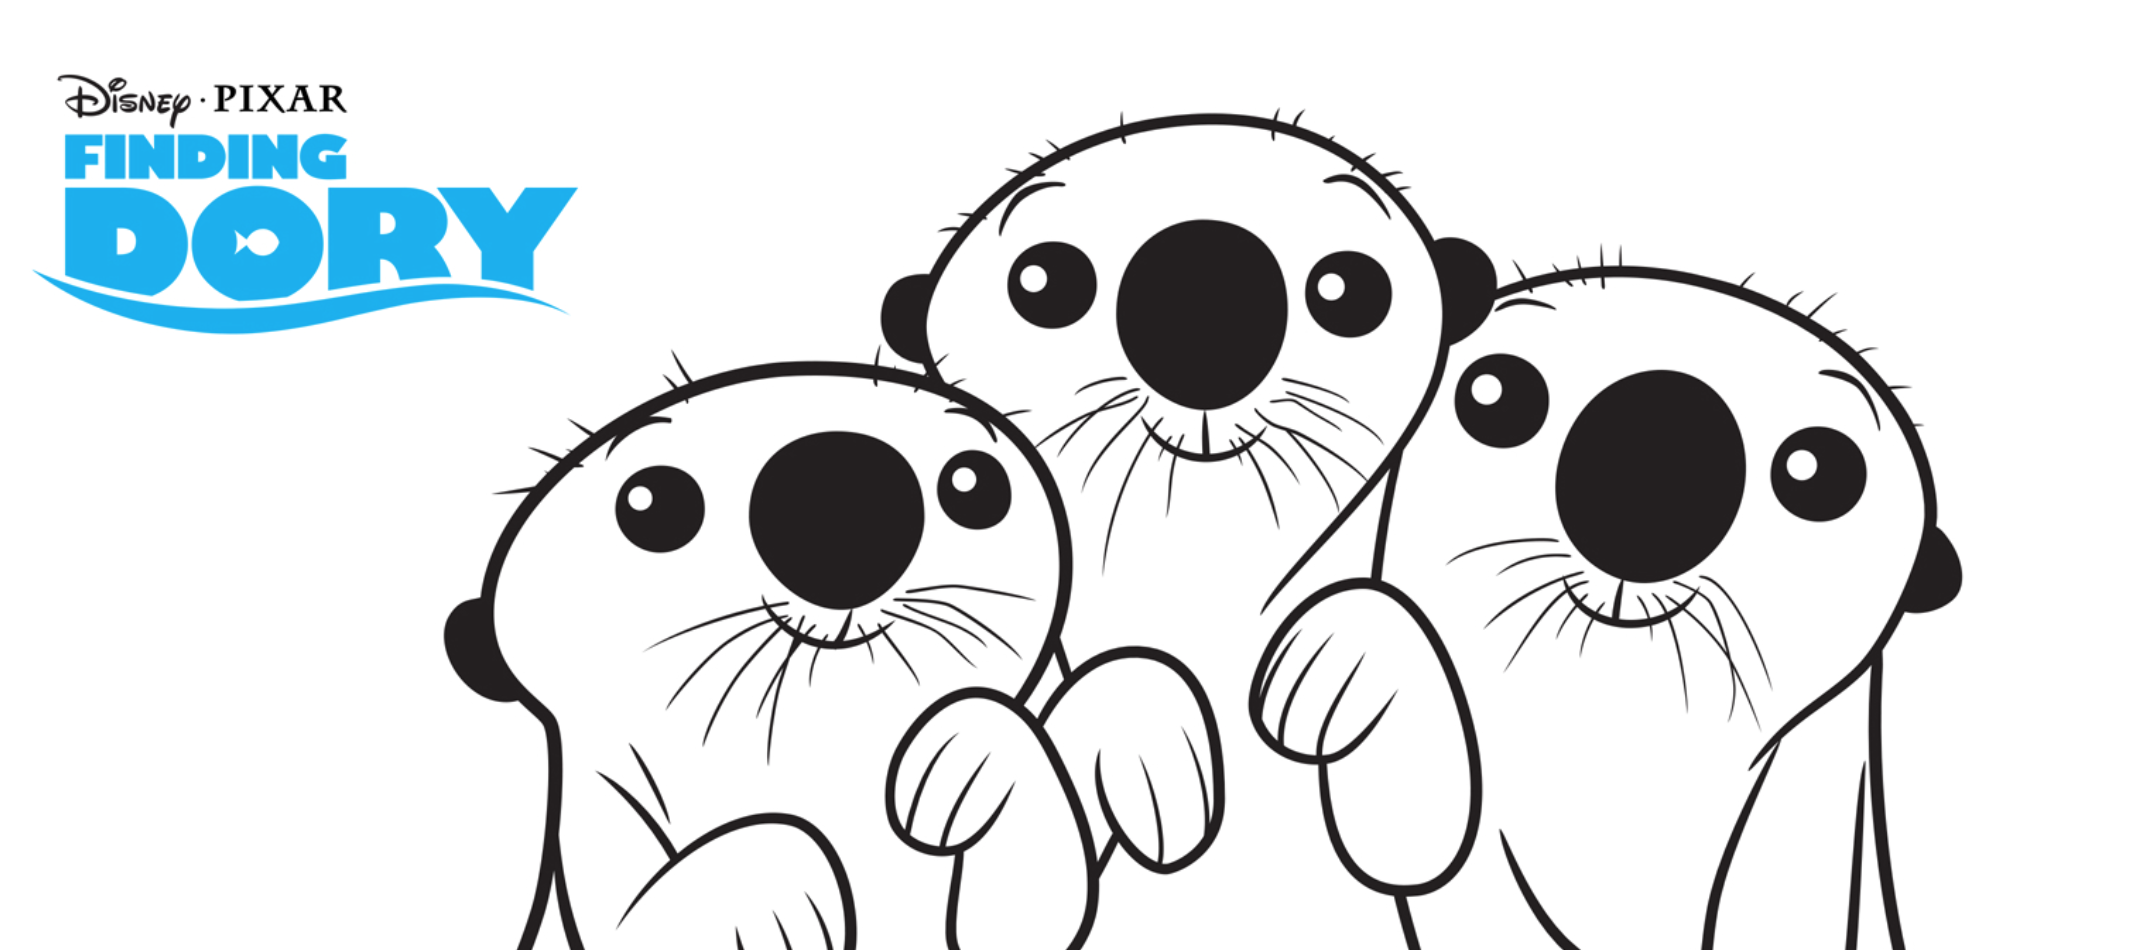 cute otter coloring pages